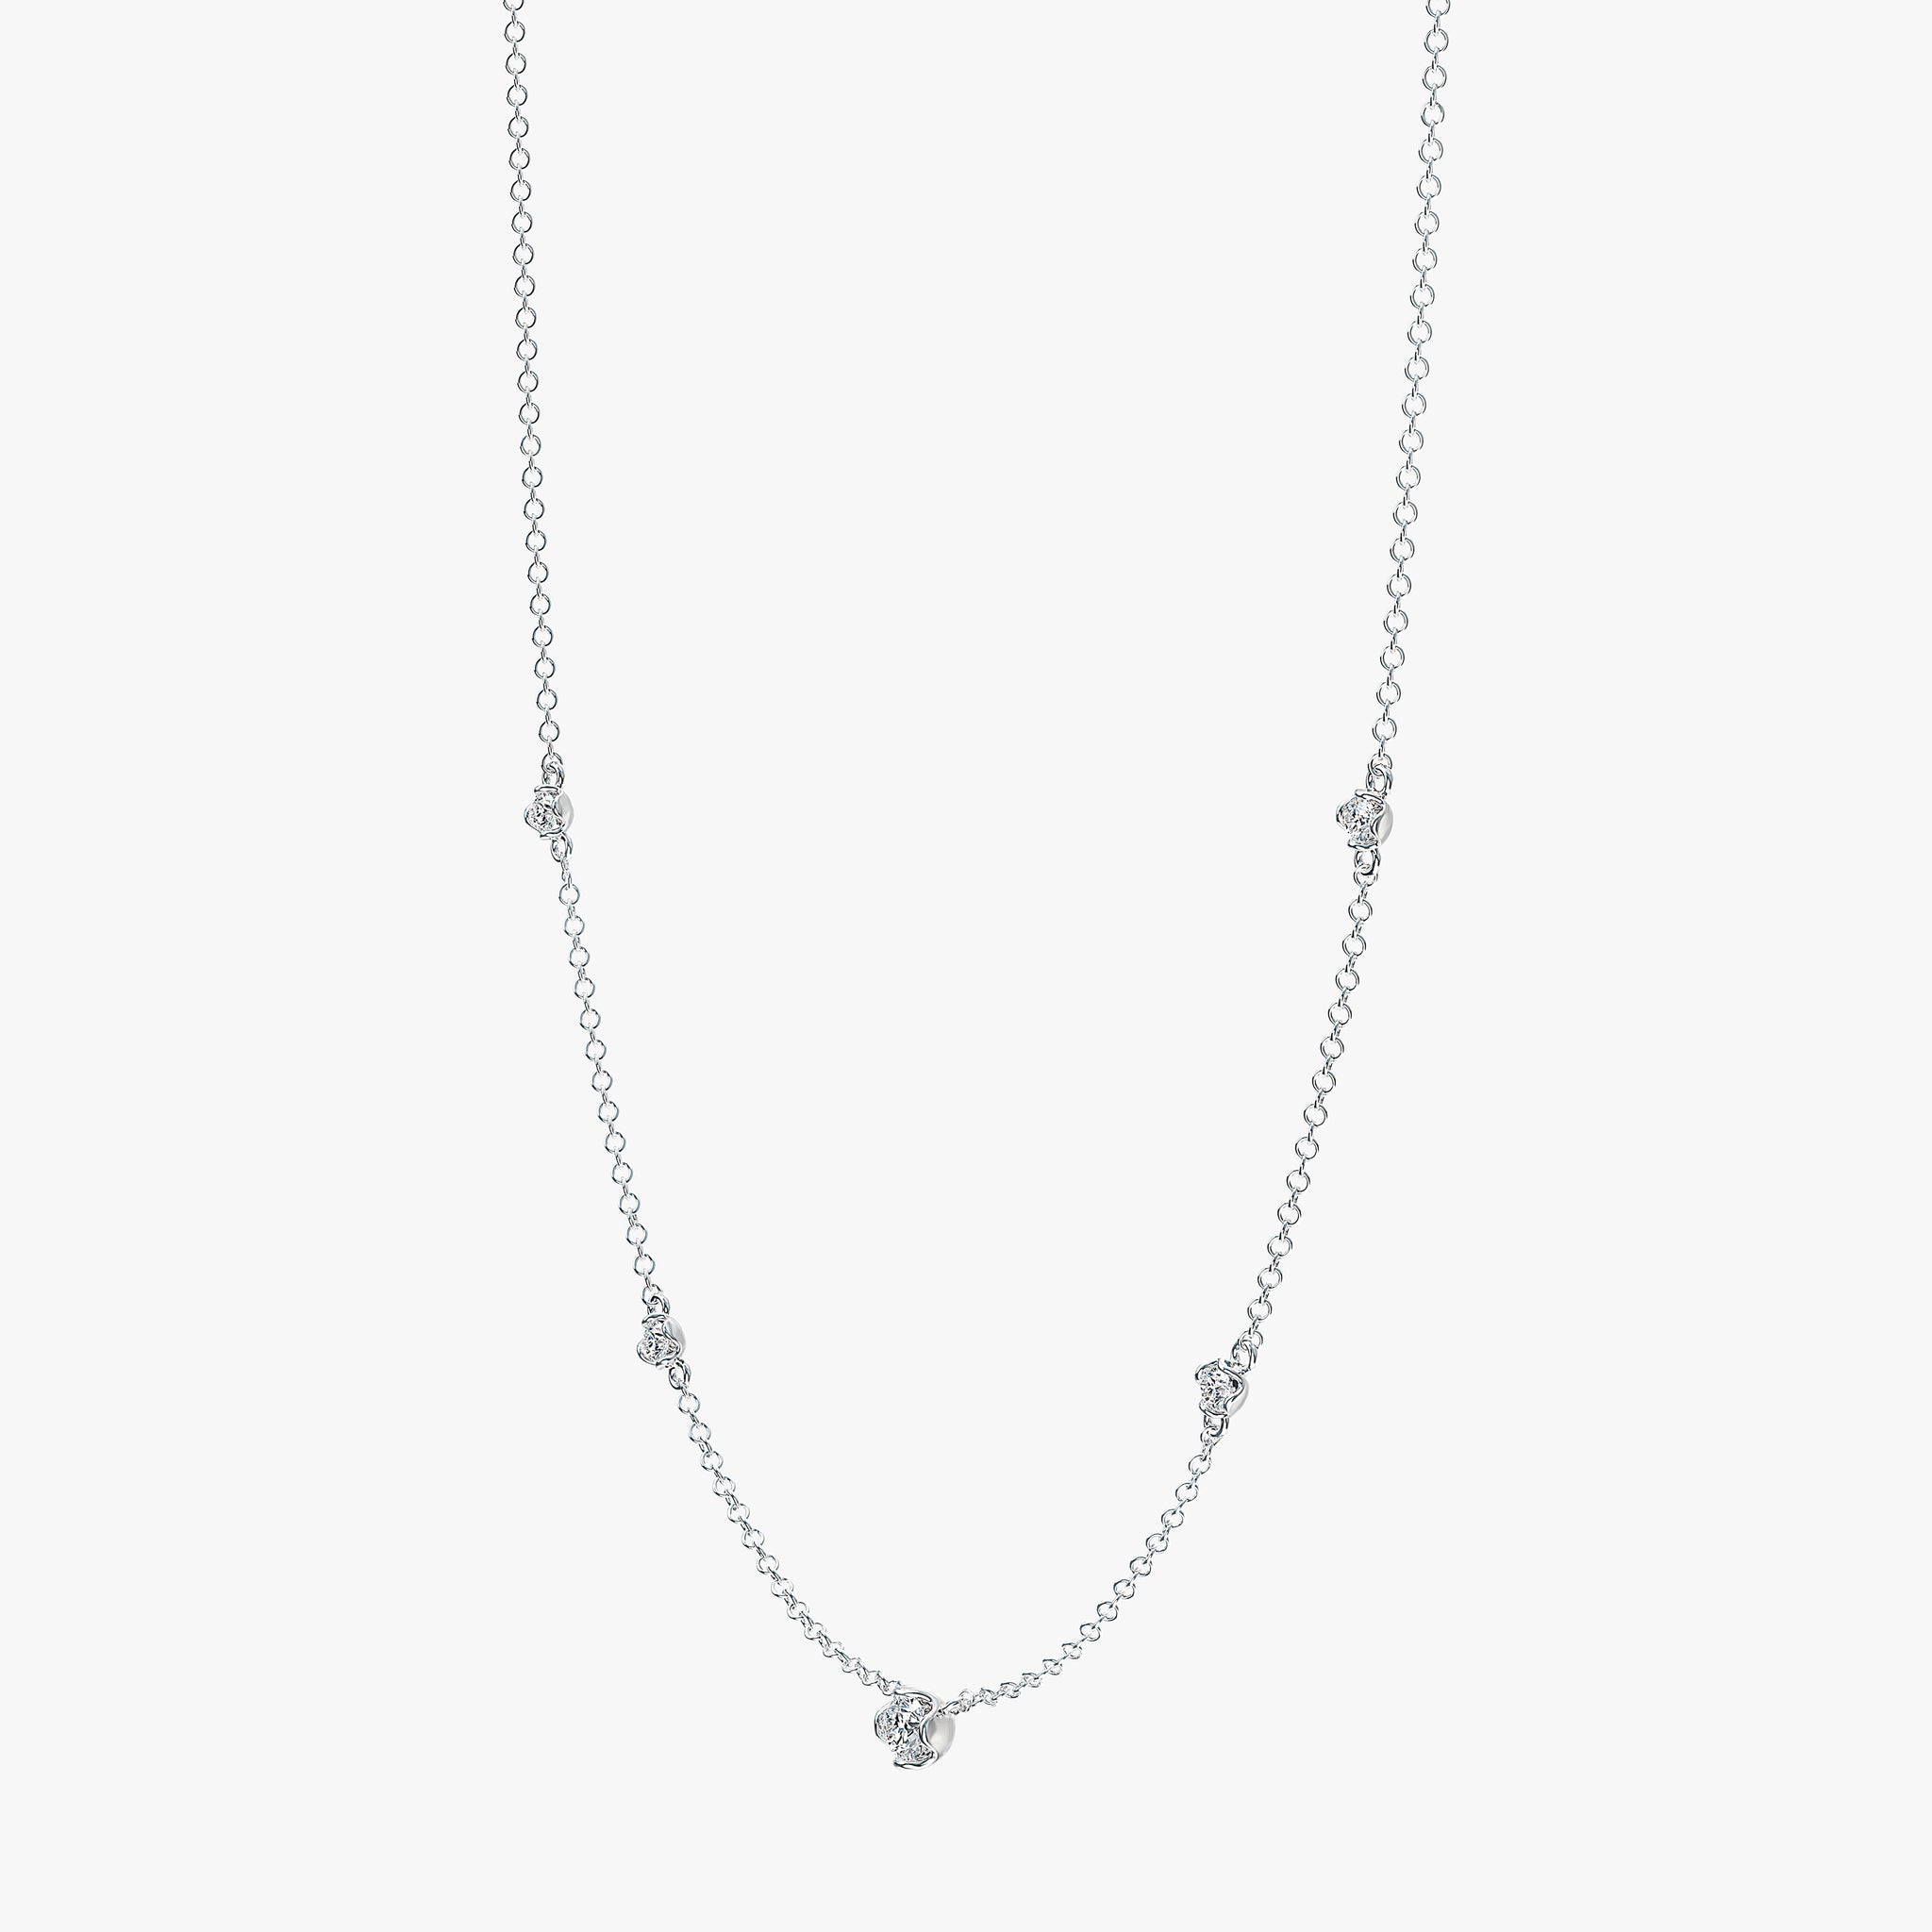 J'EVAR 14KT White Gold By The Yard ALTR Lab Grown Diamond Necklace Perspective View